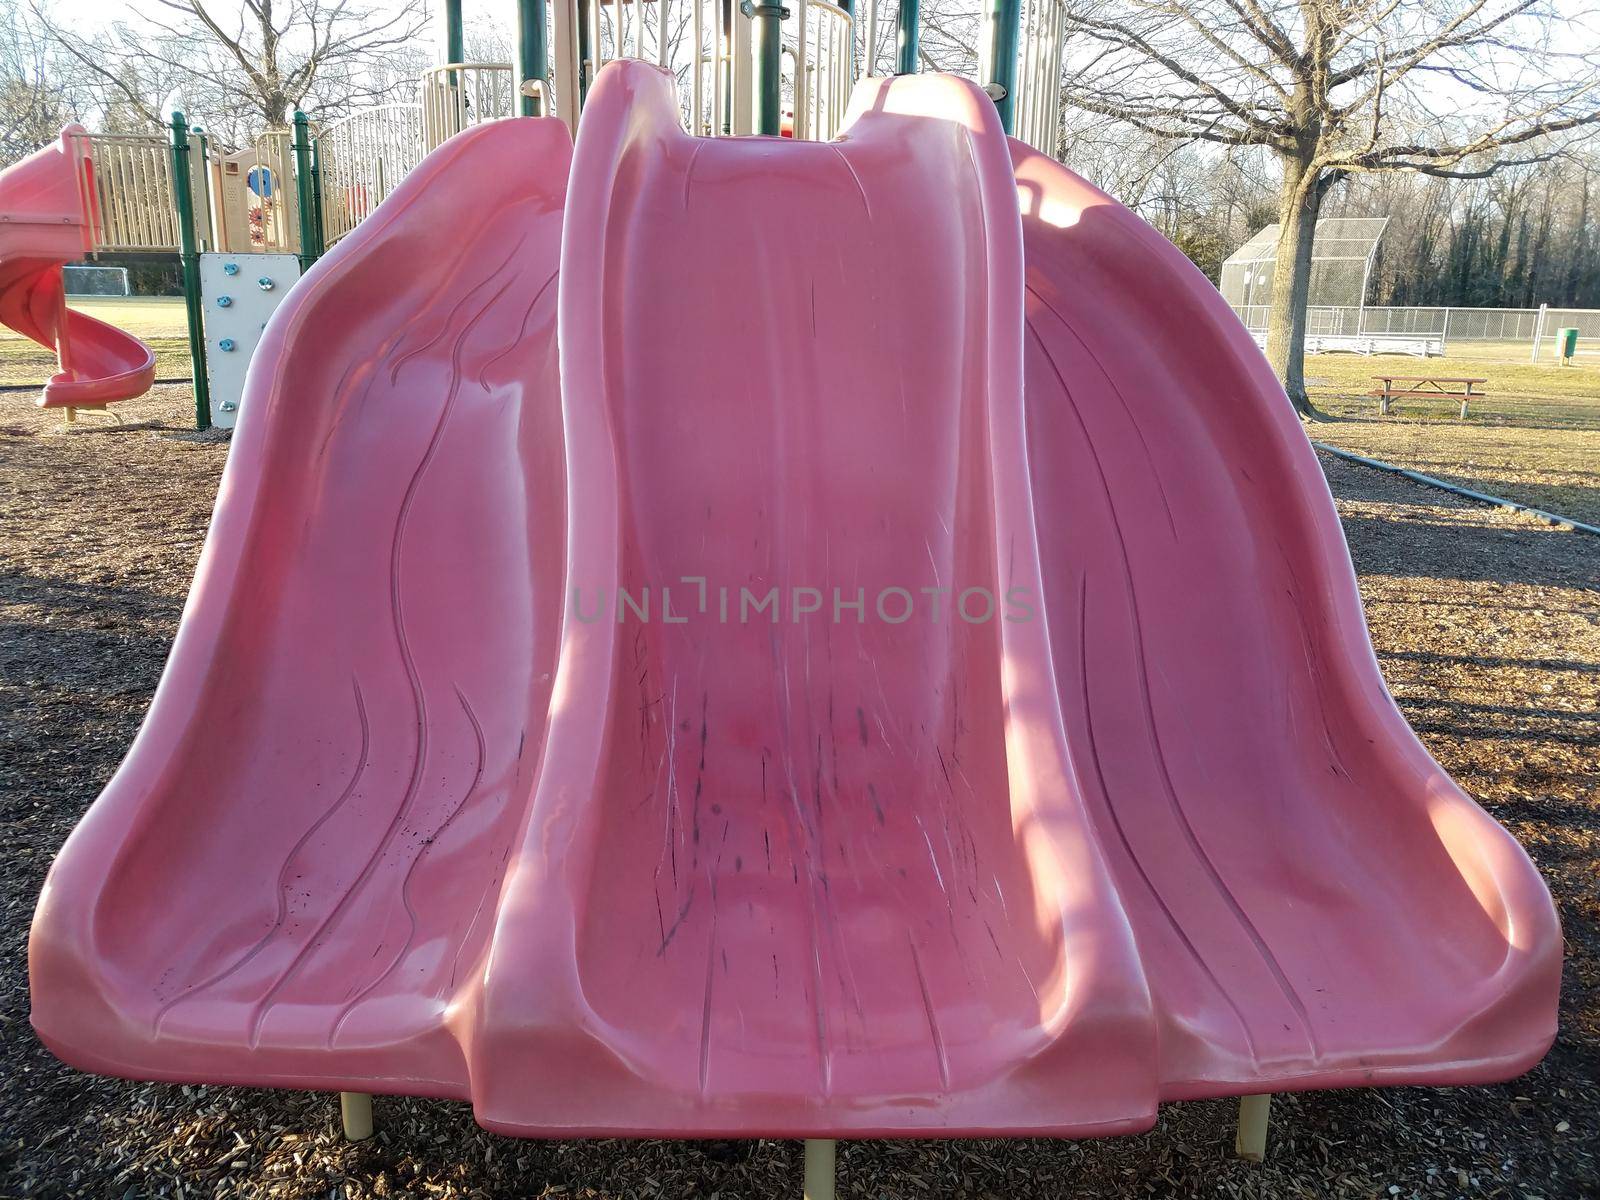 steep red or pink plastic slide at park playground by stockphotofan1